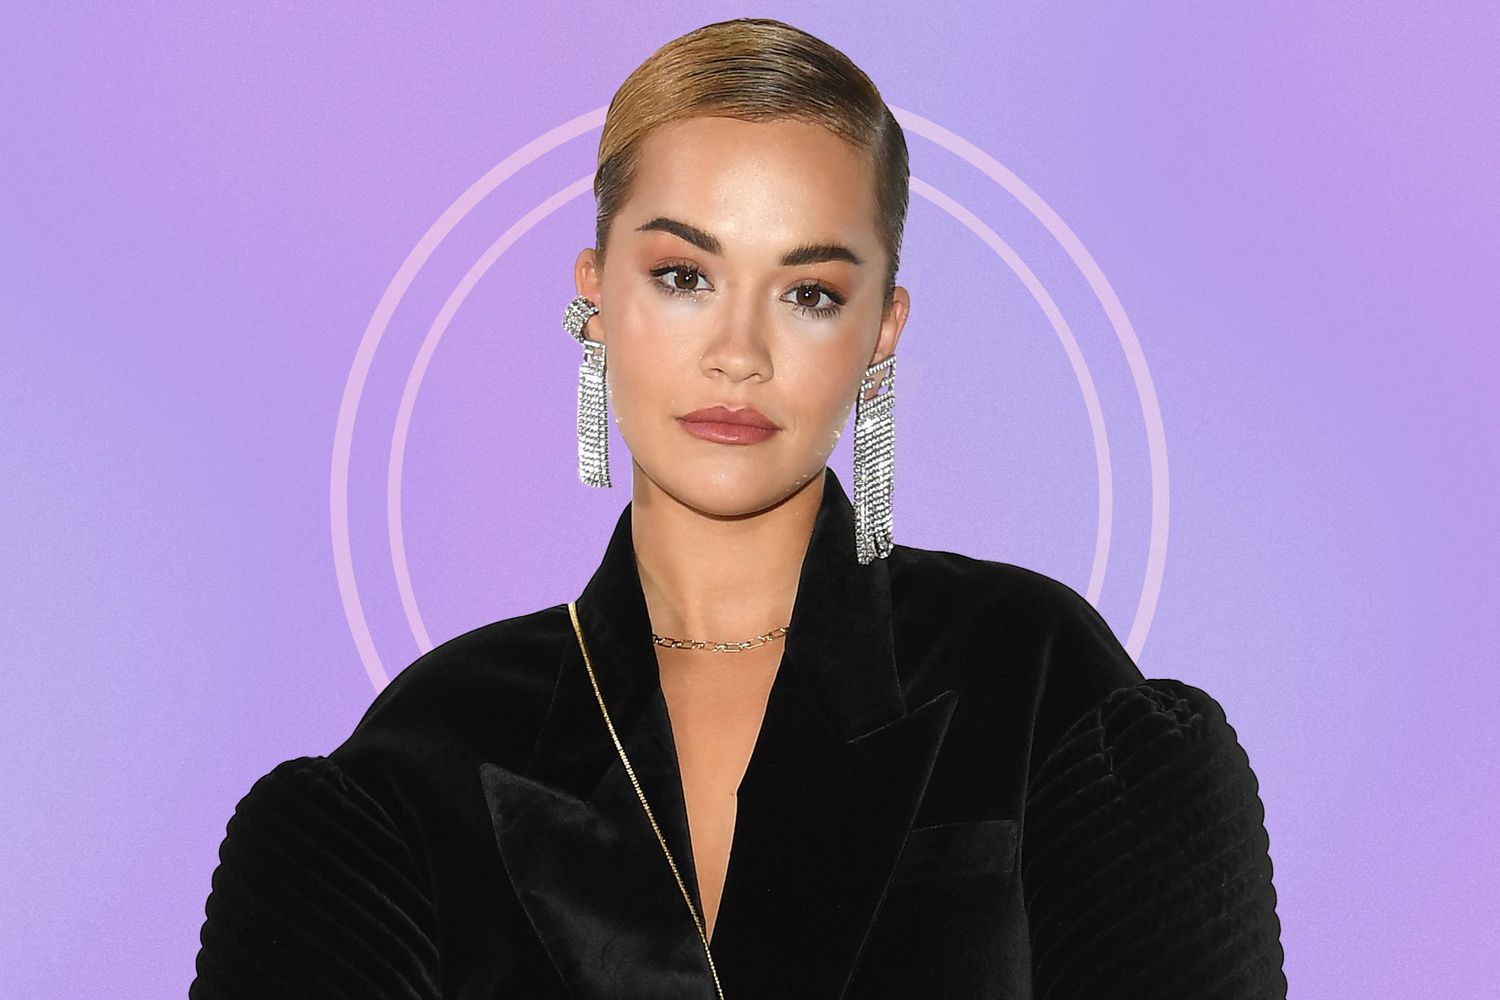 Rita-Ora-Is-Living-for-This-Ice-Powdered-Face-Mask-GettyImages-1275858766